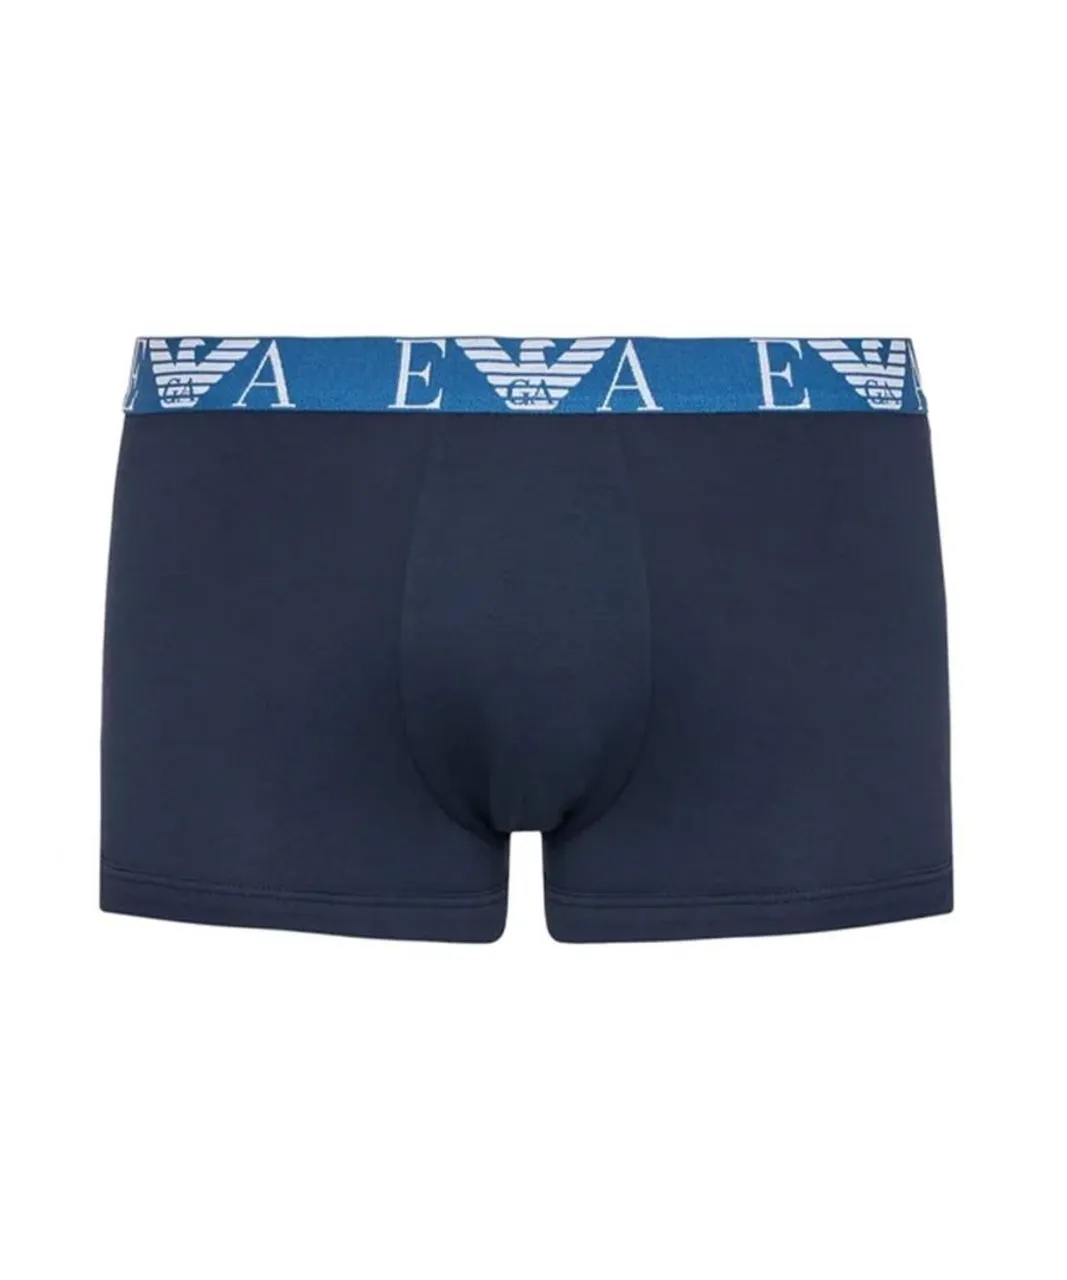 Armani Mens 3-Pack Trunks in Navy Cotton